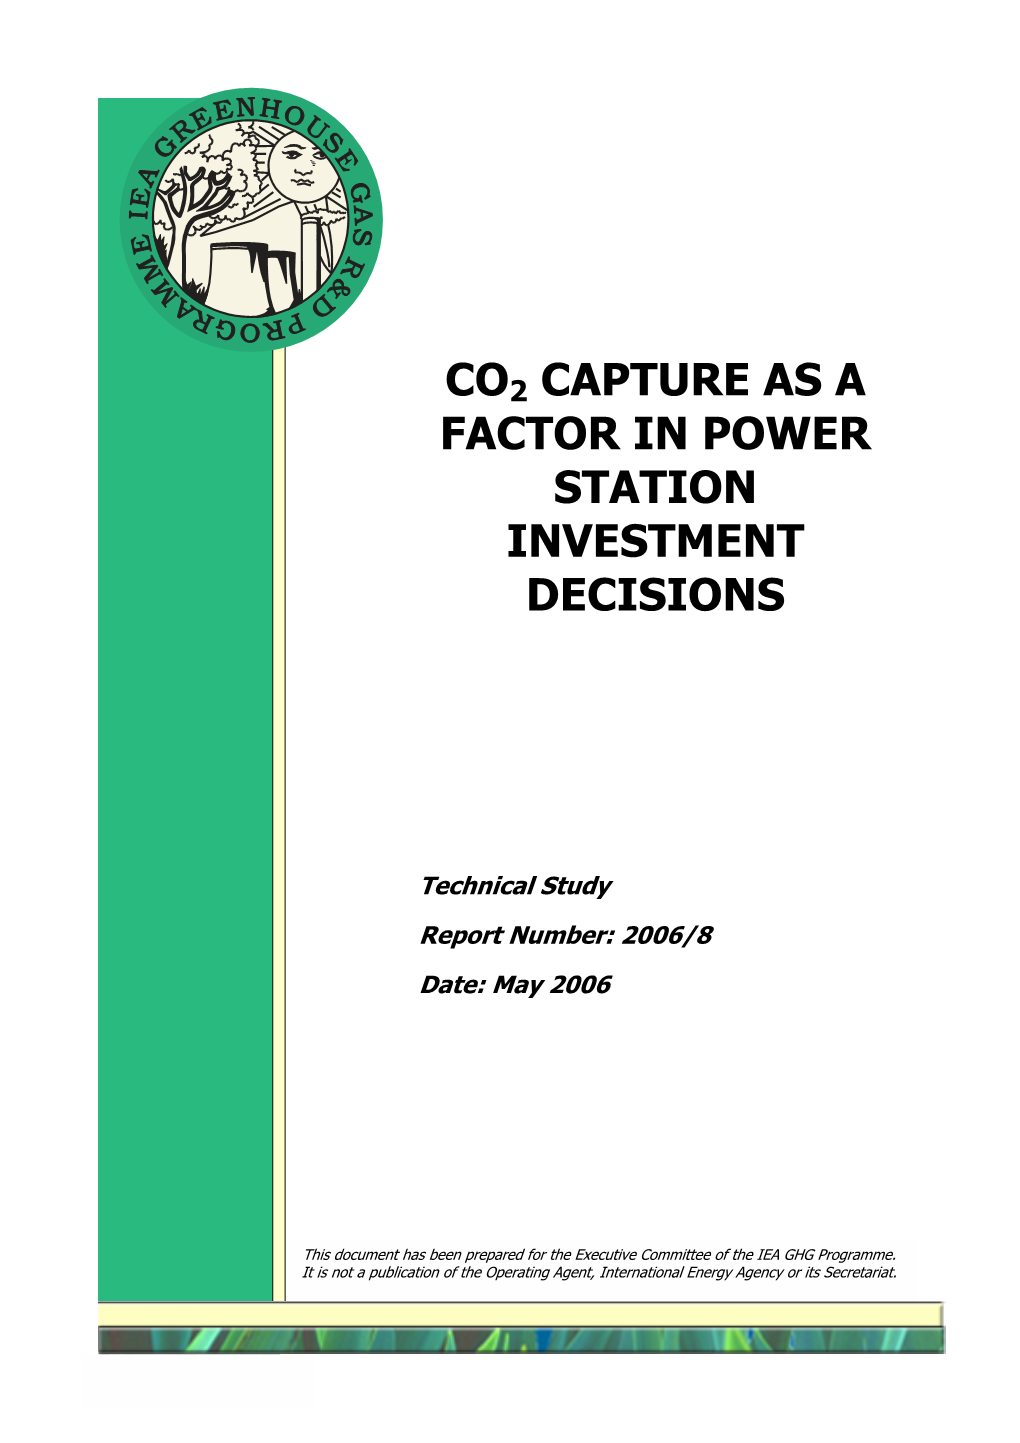 Co2 Capture As a Factor in Power Station Investment Decisions